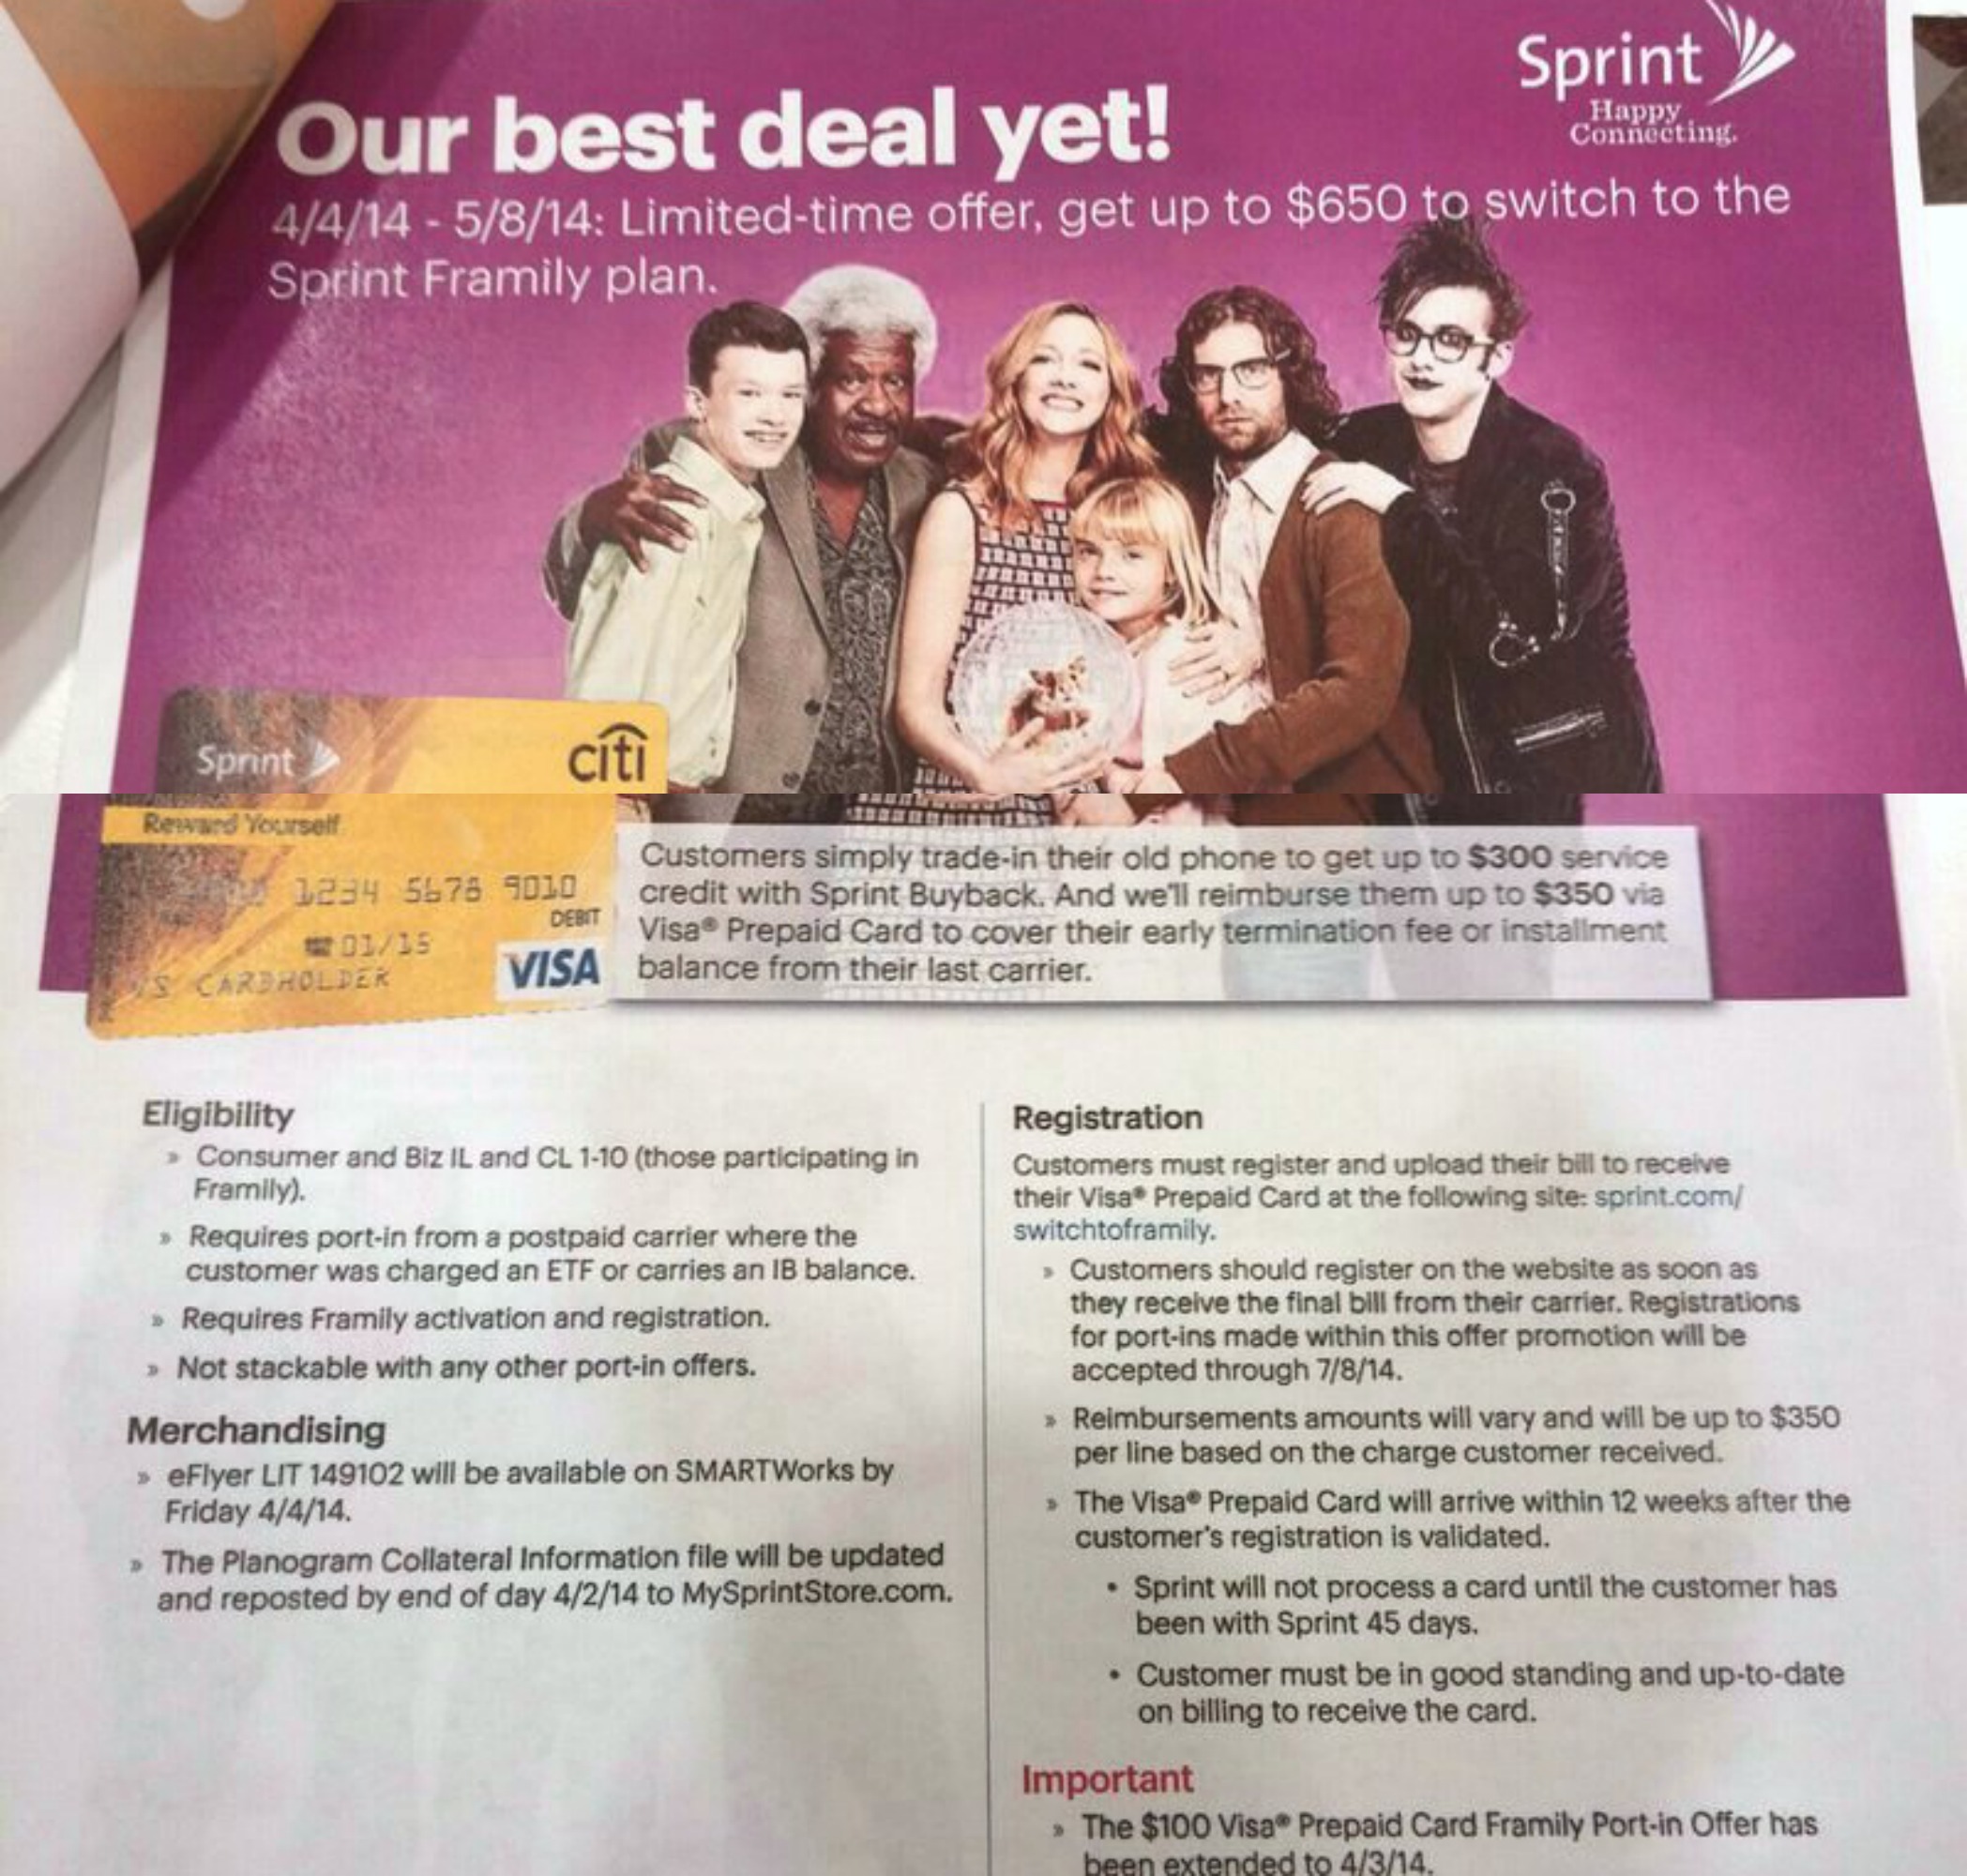 sprint-to-pull-a-t-mobile-and-pay-your-early-termination-fees-if-you